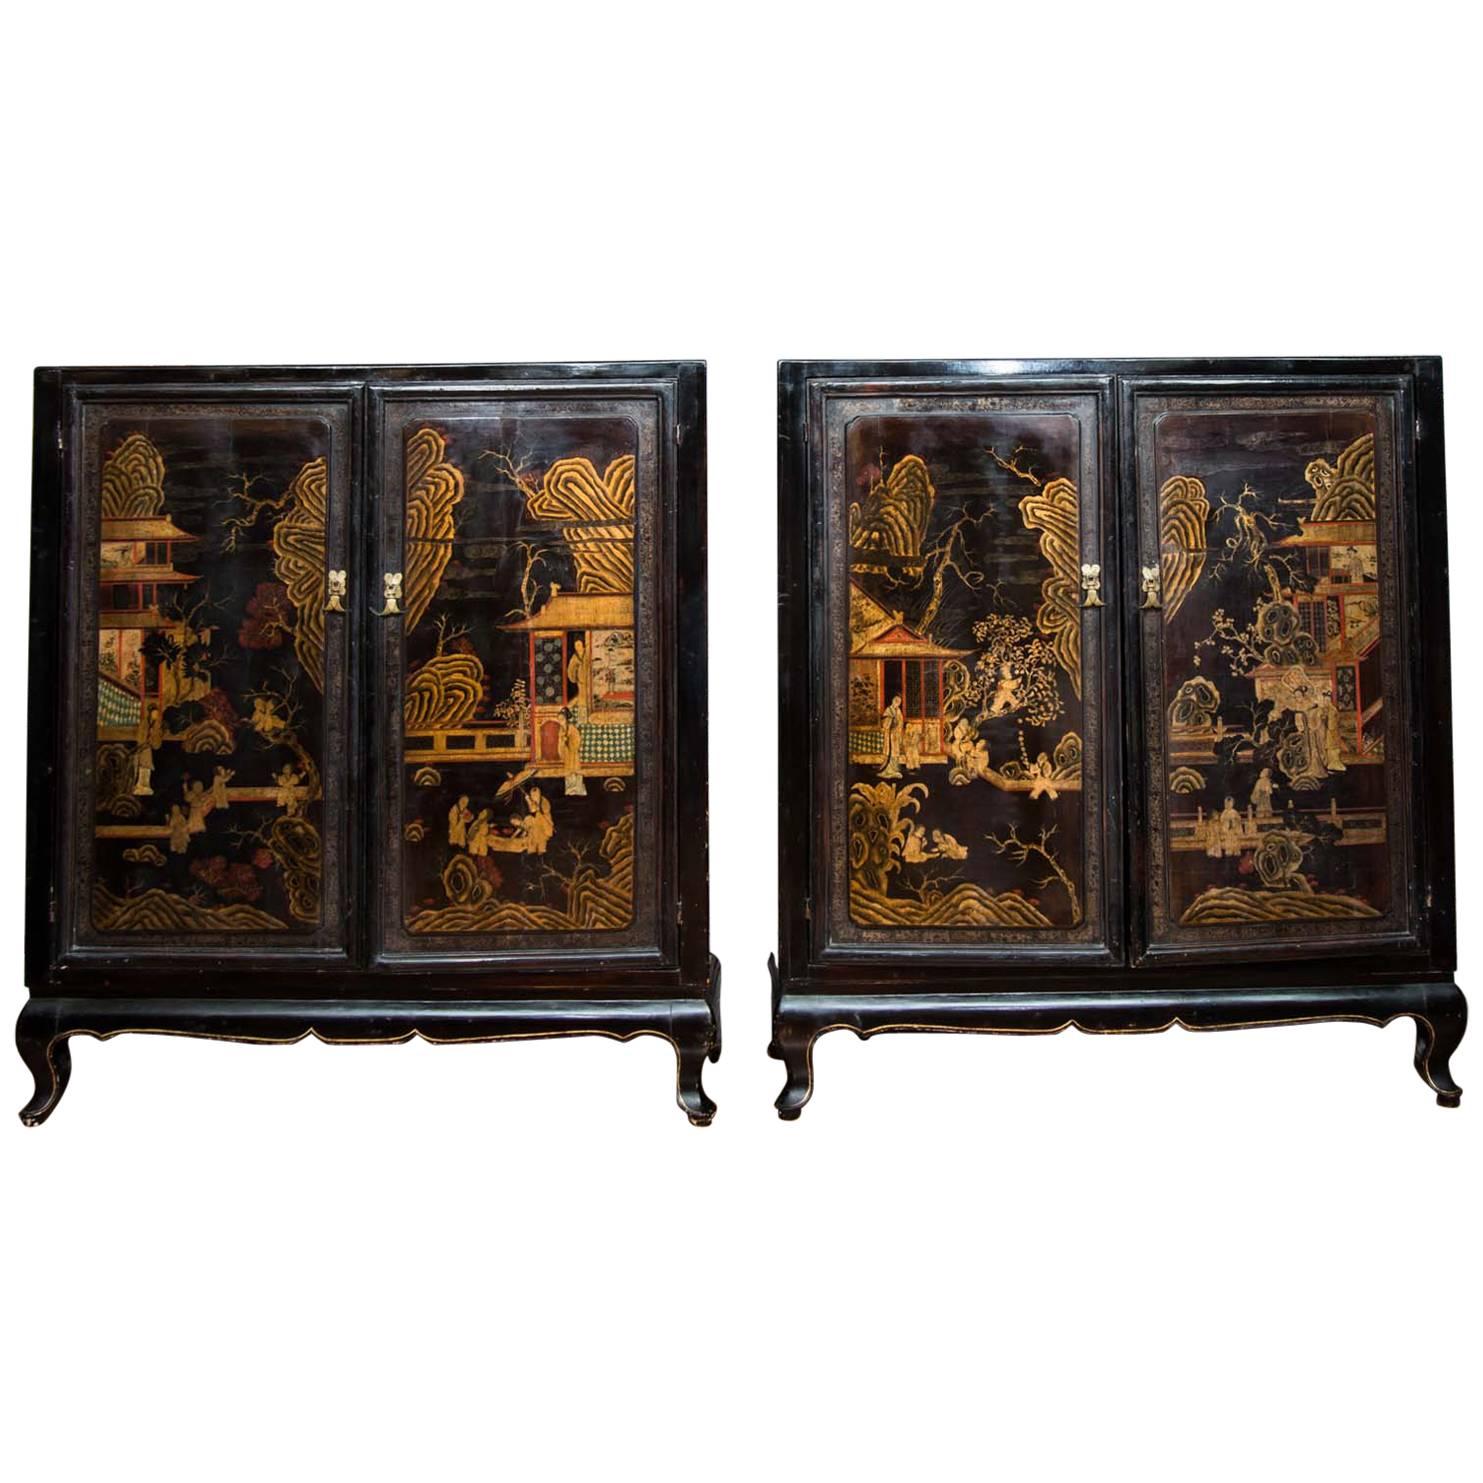 Elegant Pair of Chinese Cabinets